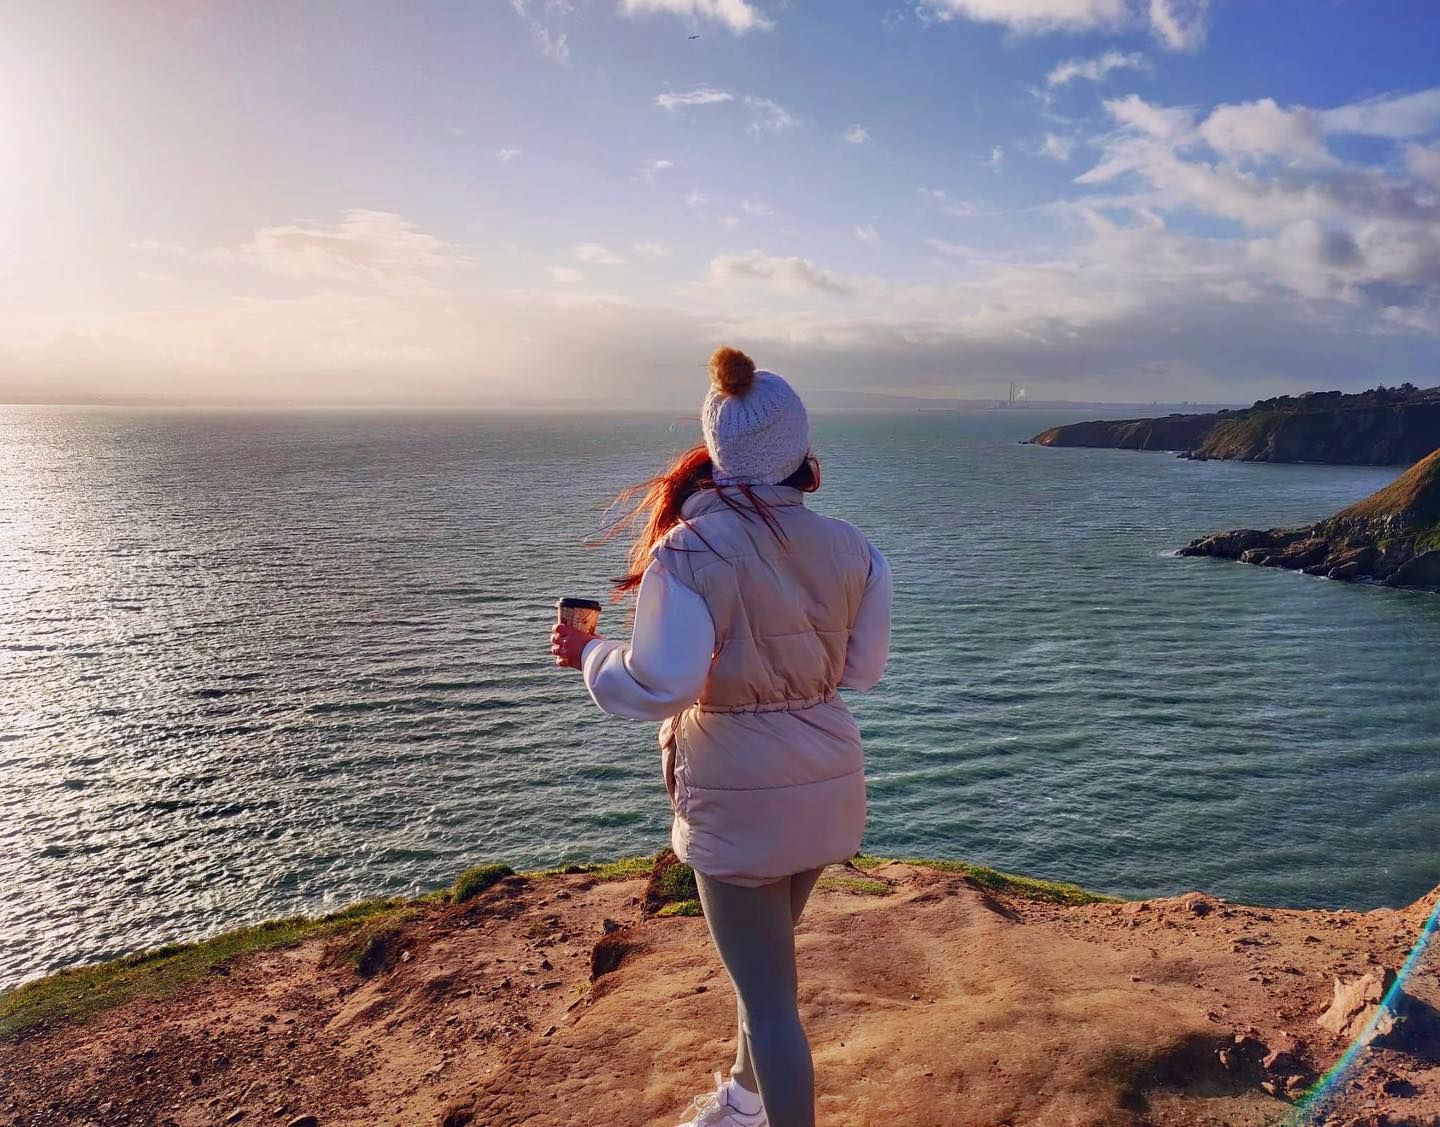 Take advantage of the views from the top of the windswept cliff and around Howth Head.